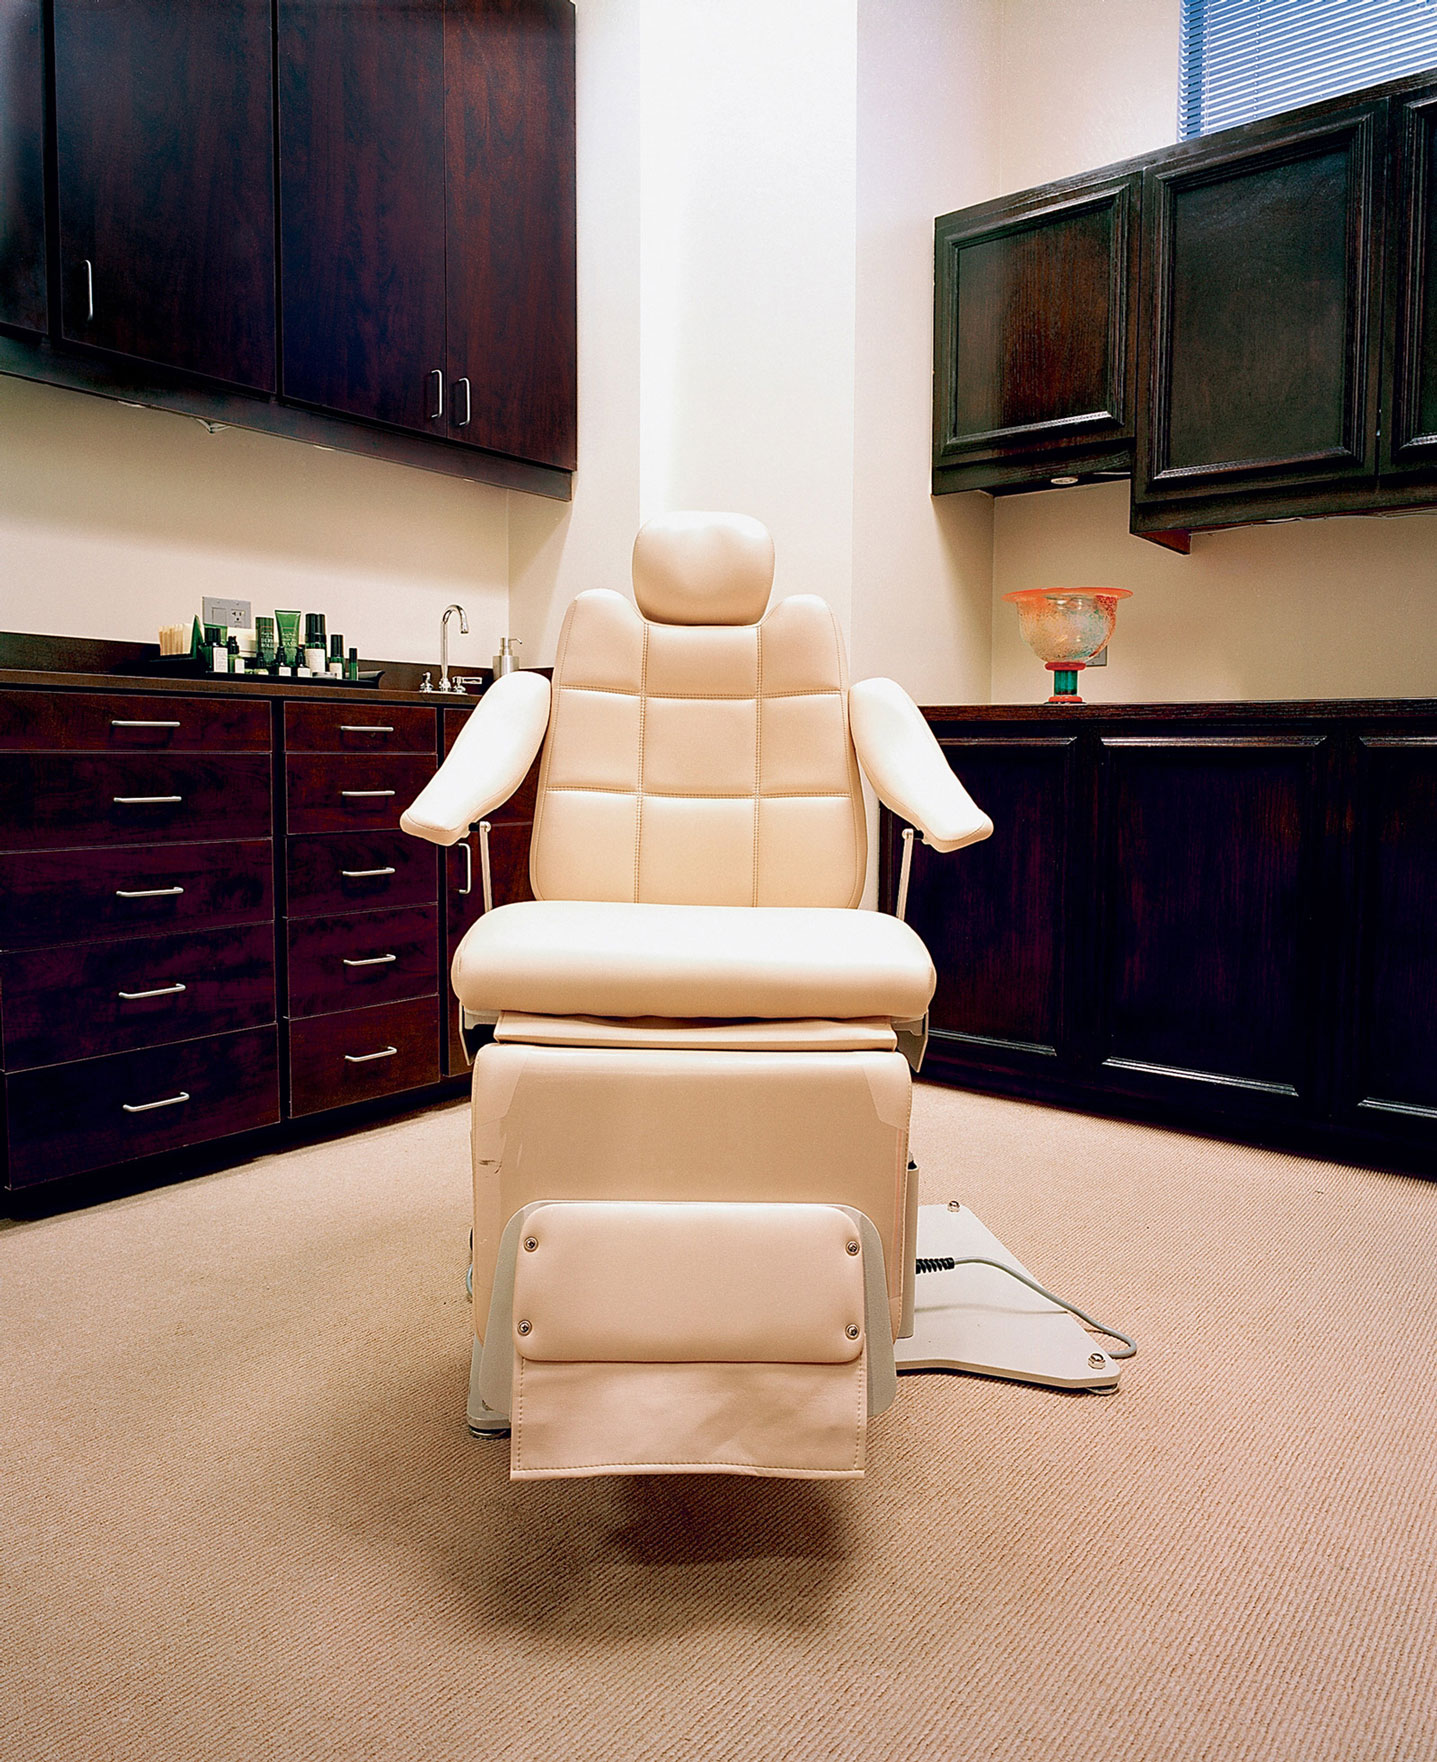 A 2008 photograph by Cara Phillips titled “Beige Construction Chair.”